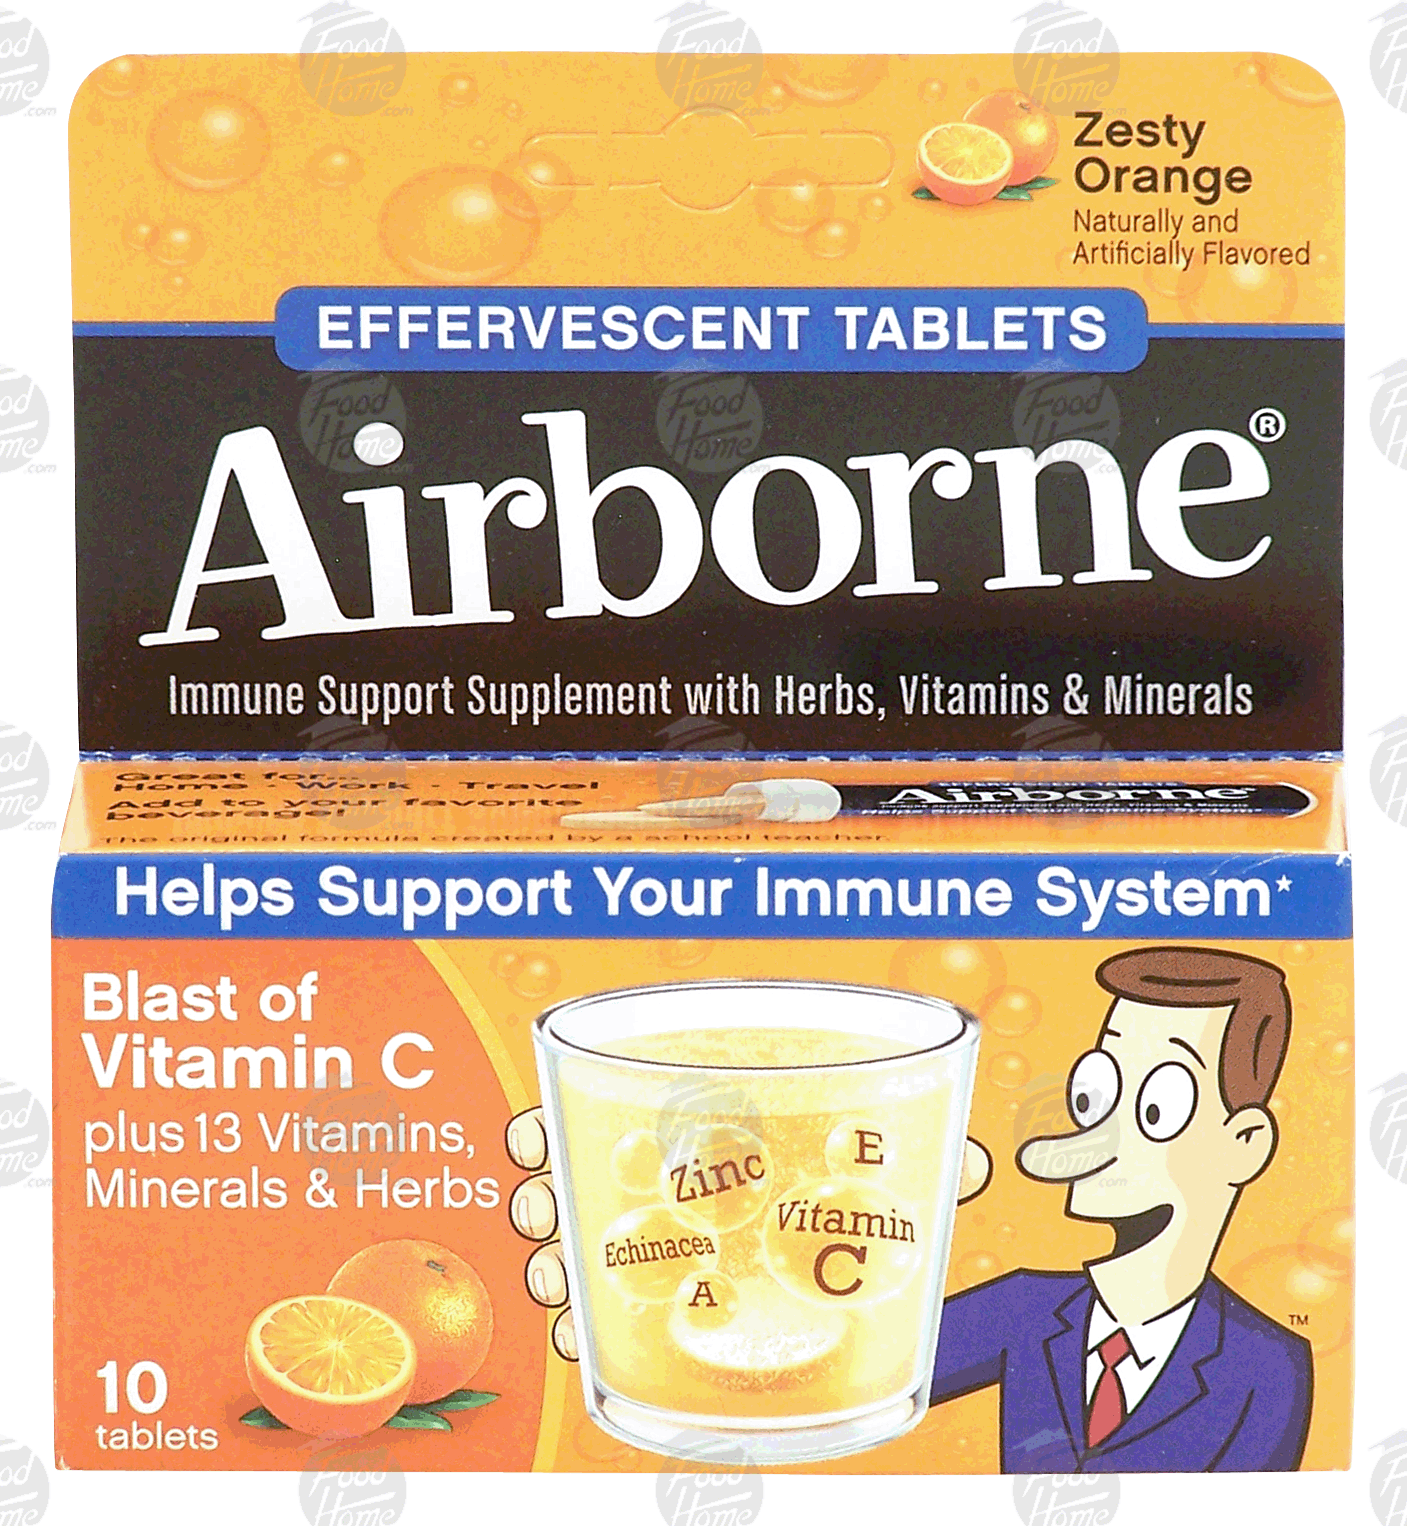 Airborne  dietary supplement, helps body fight germs, zesty orange flavored Full-Size Picture